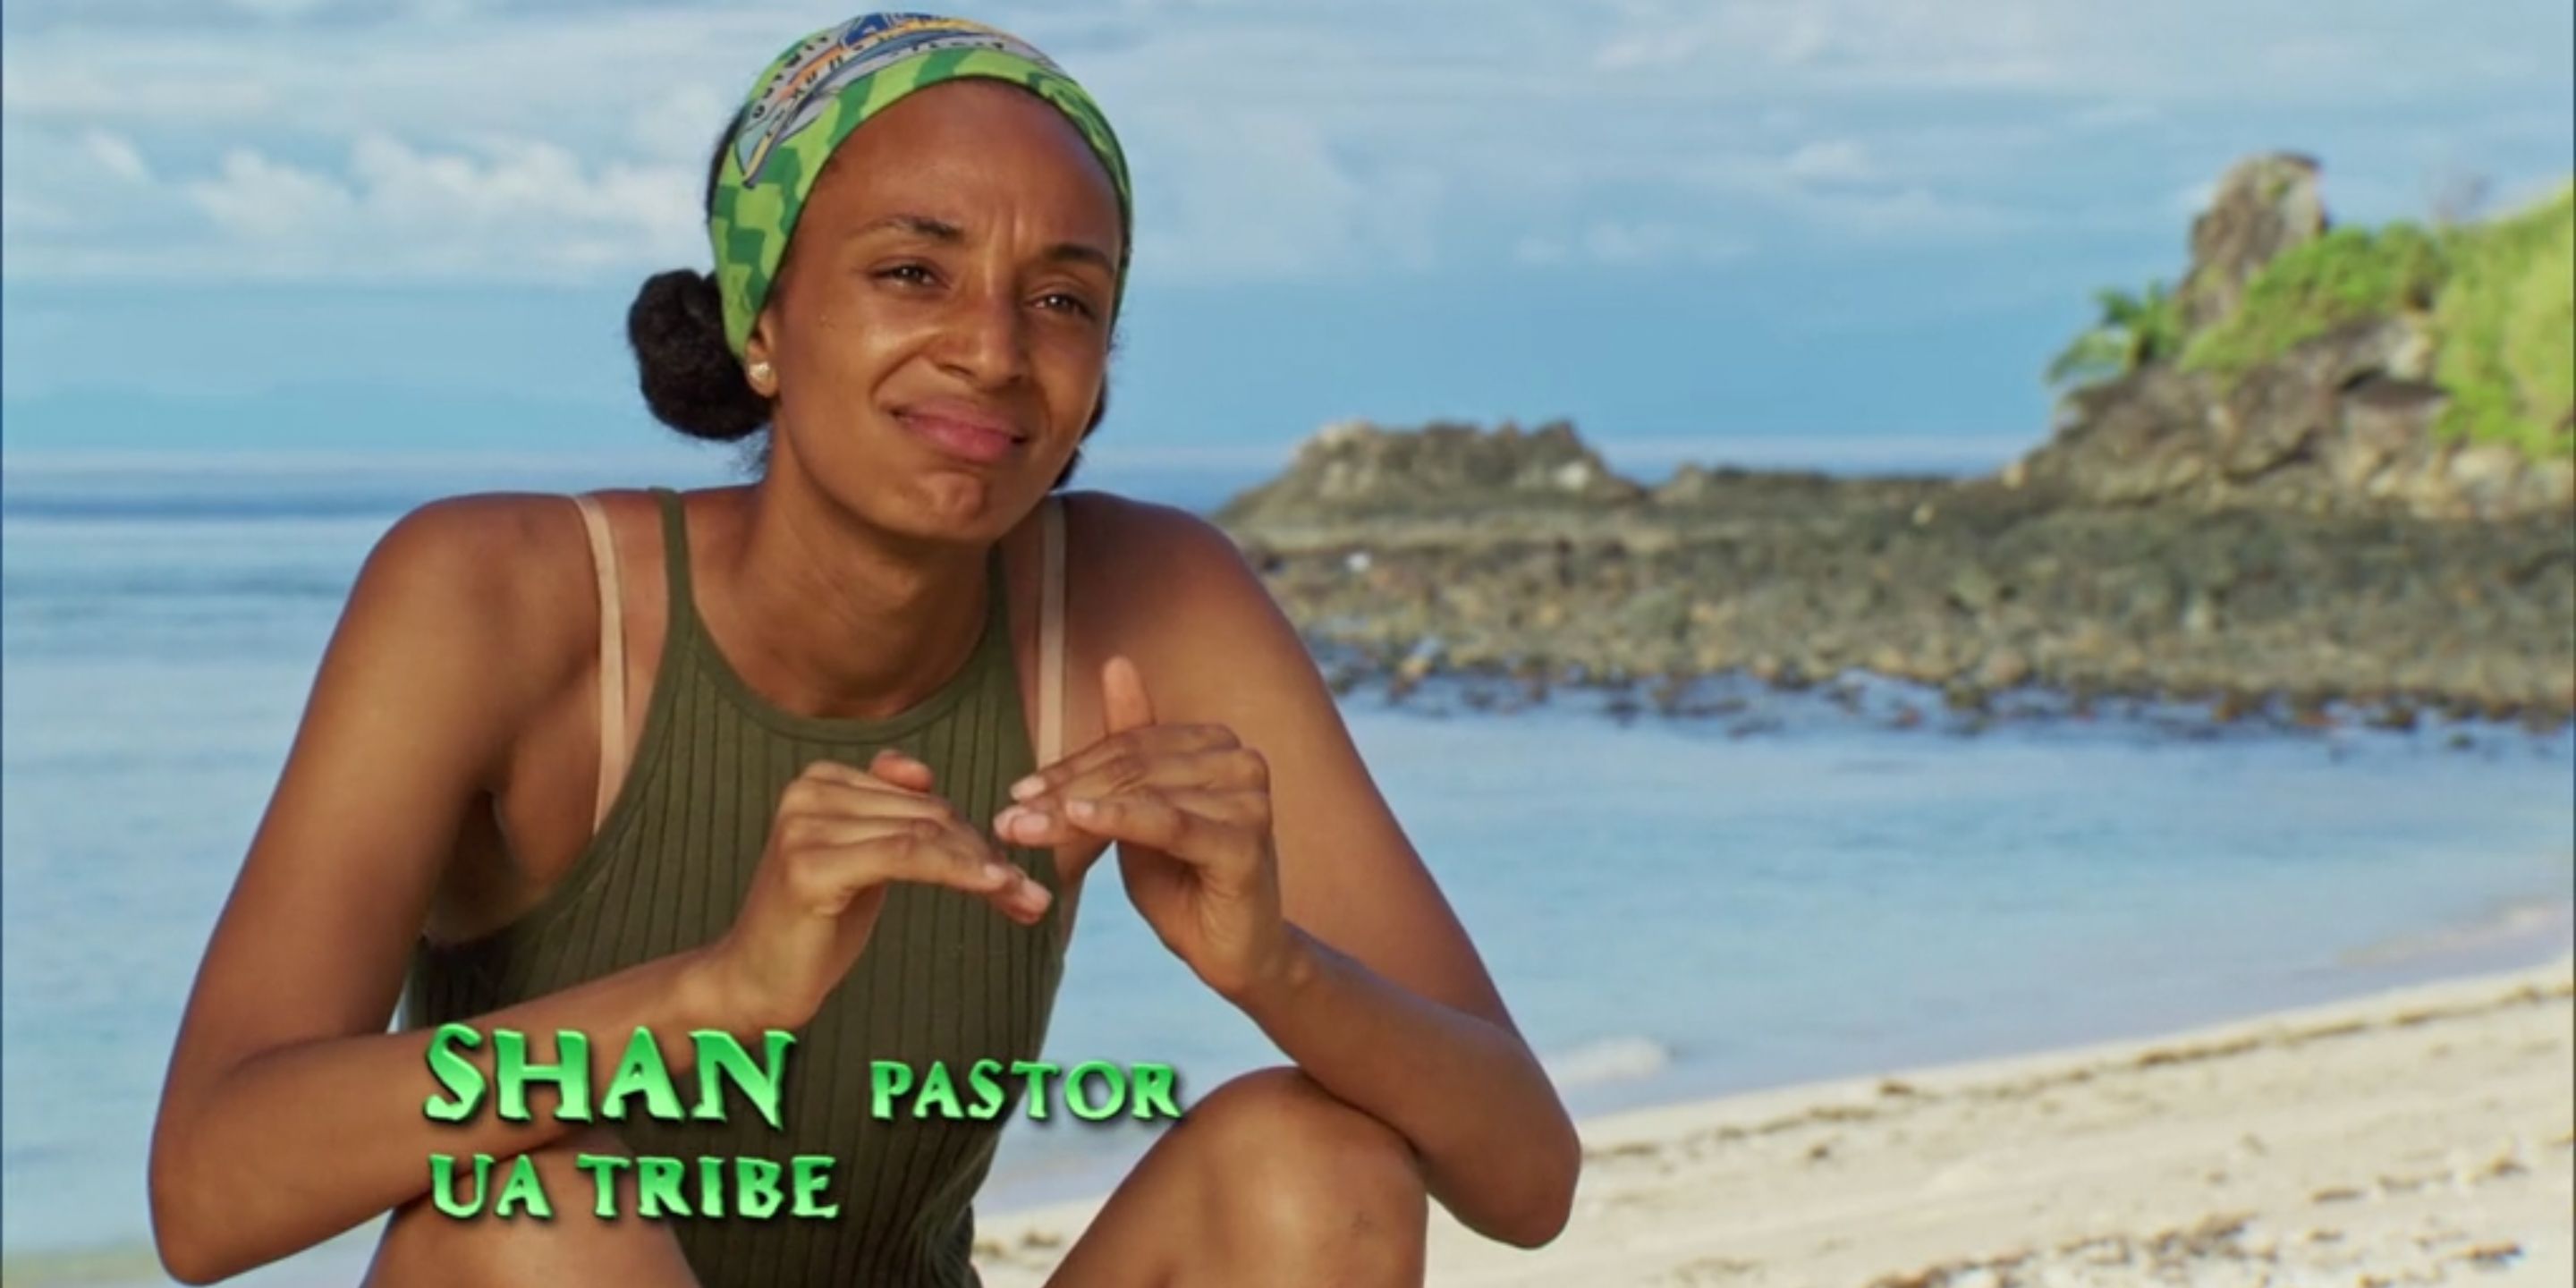 Survivor: Who Is Most Likely To Win Season 41 Based on the Edit